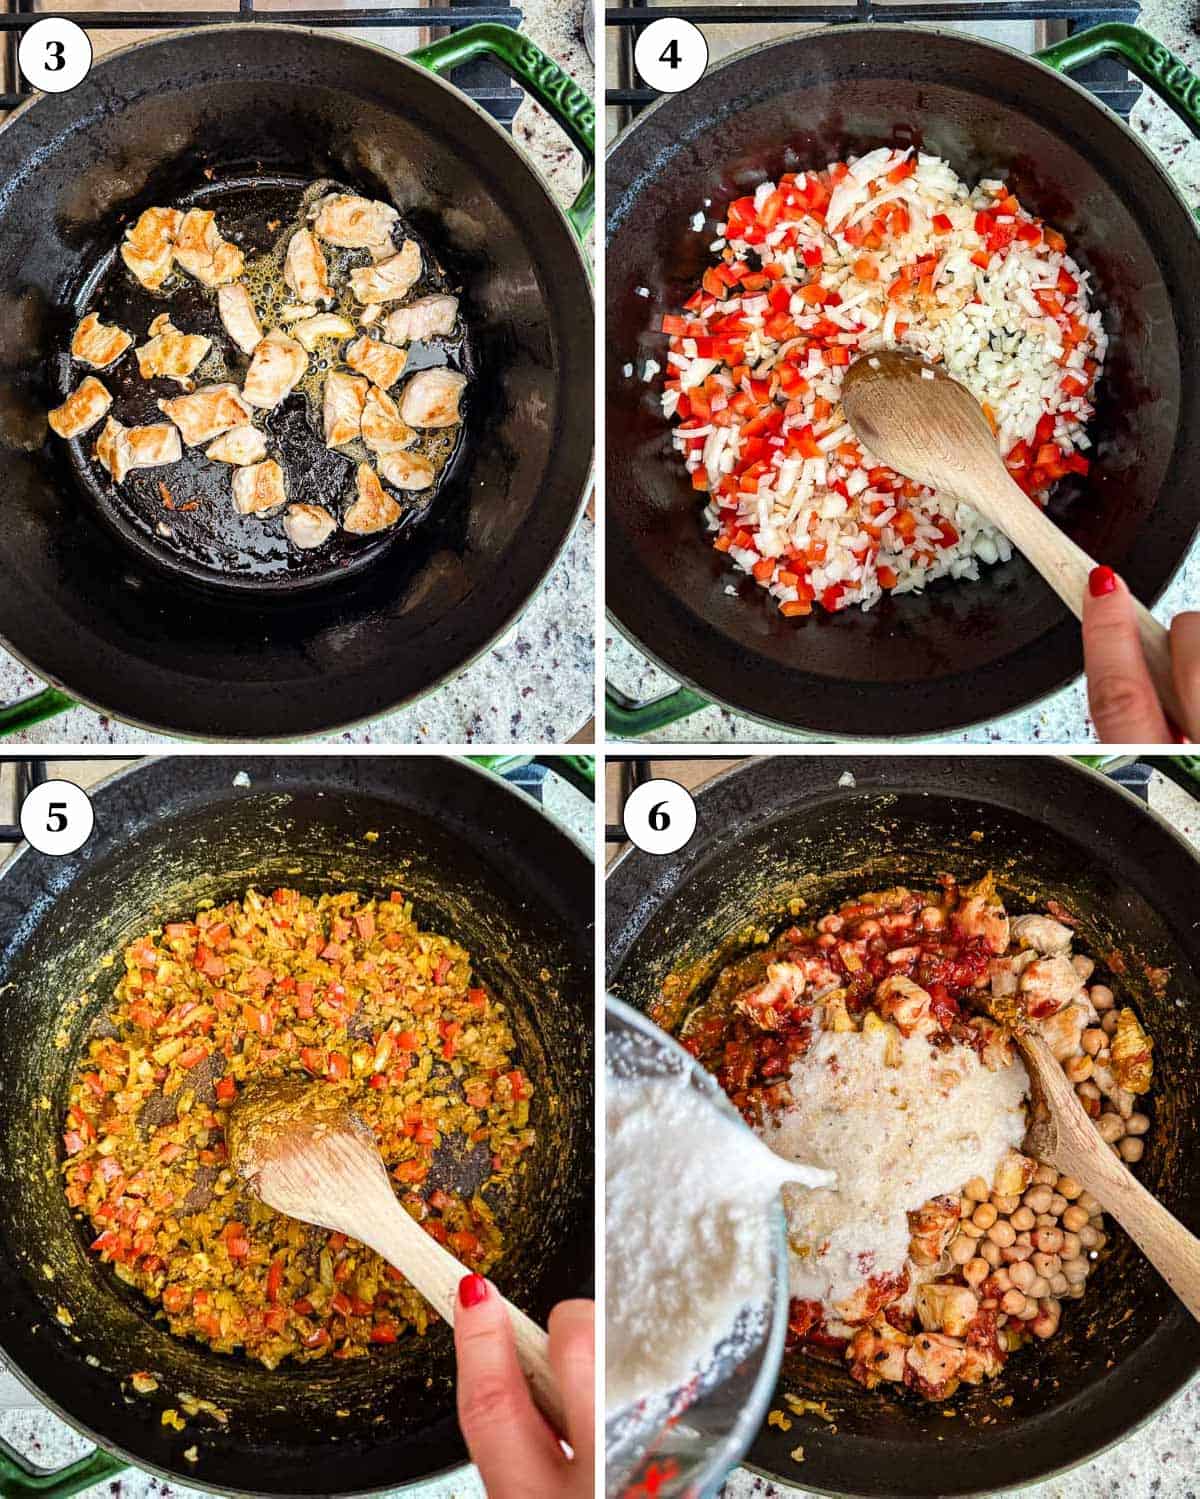 A collage of images showing how to make chicken curry with chickpeas and coconut milk.